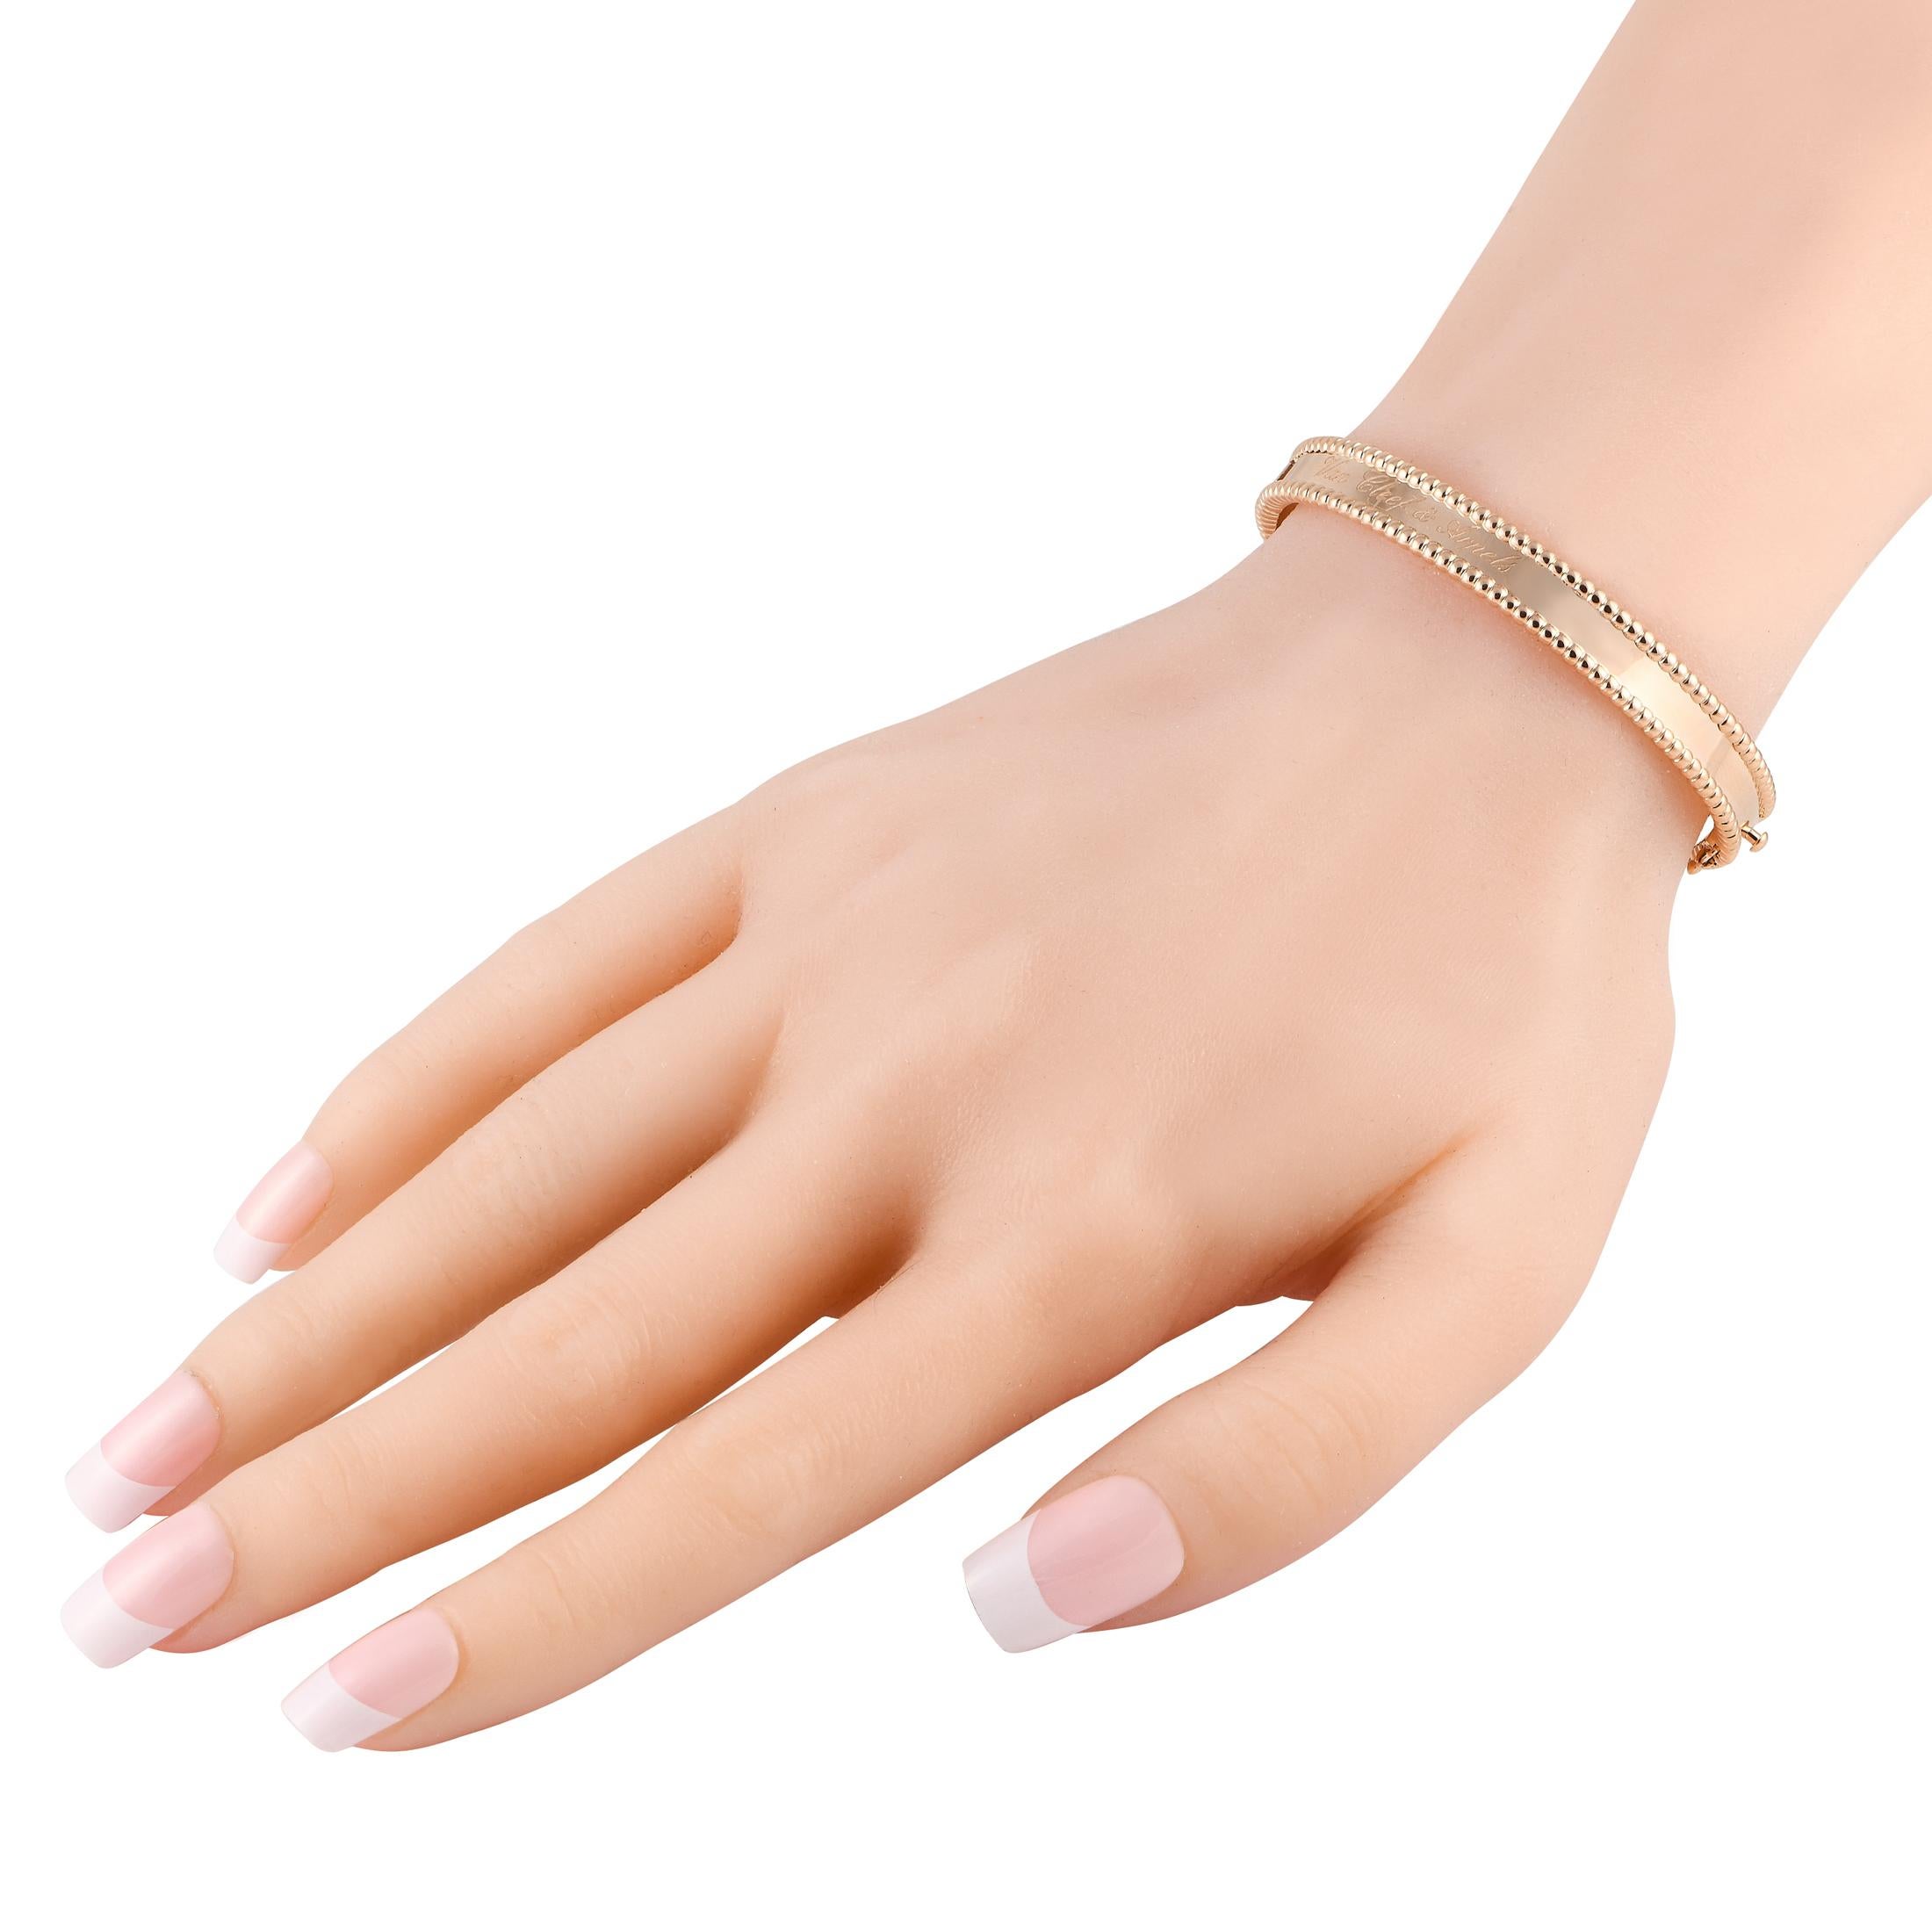 Sleek, sophisticated, and incredibly elegant, this 18K Rose Gold Van Cleef & Arpels Perlee bangle bracelet will put the perfect finishing touch on any ensemble. It measures 6.75 long and features the collections iconic metal beadwork around the